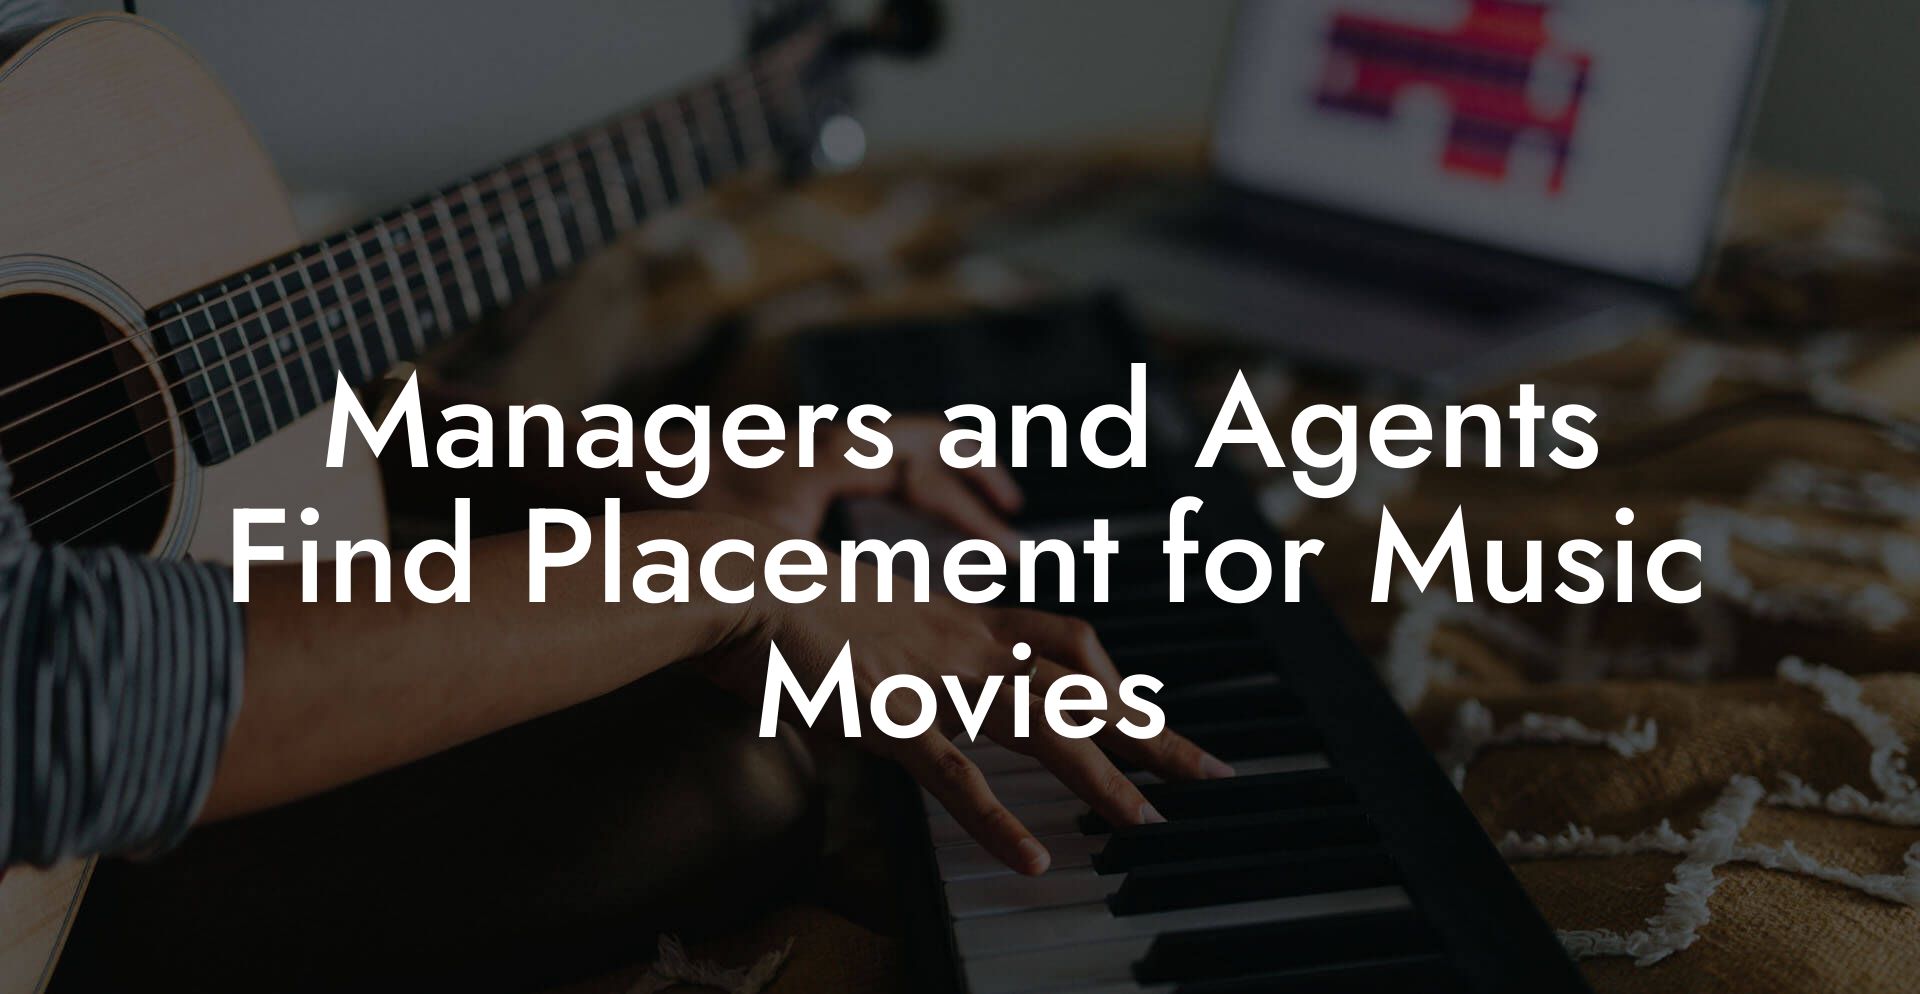 Managers and Agents Find Placement for Music Movies